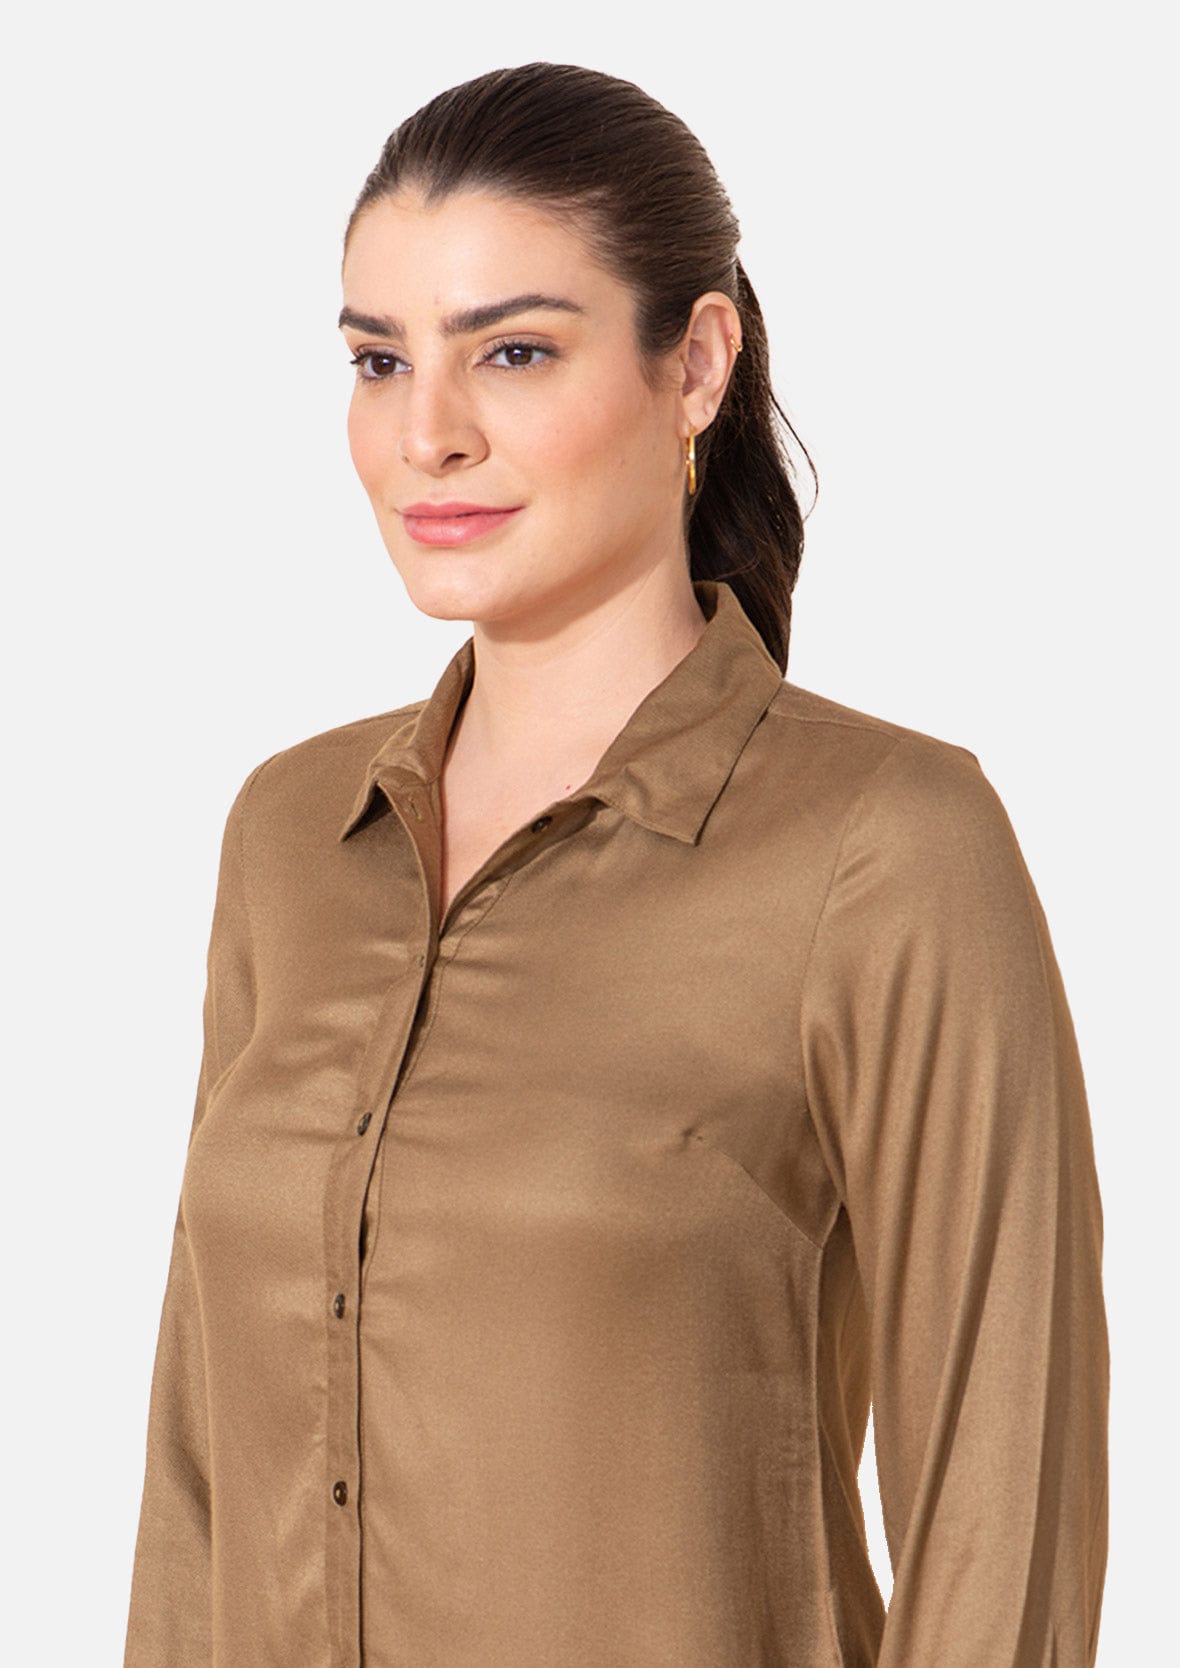 Collared Shirt With Front-Button